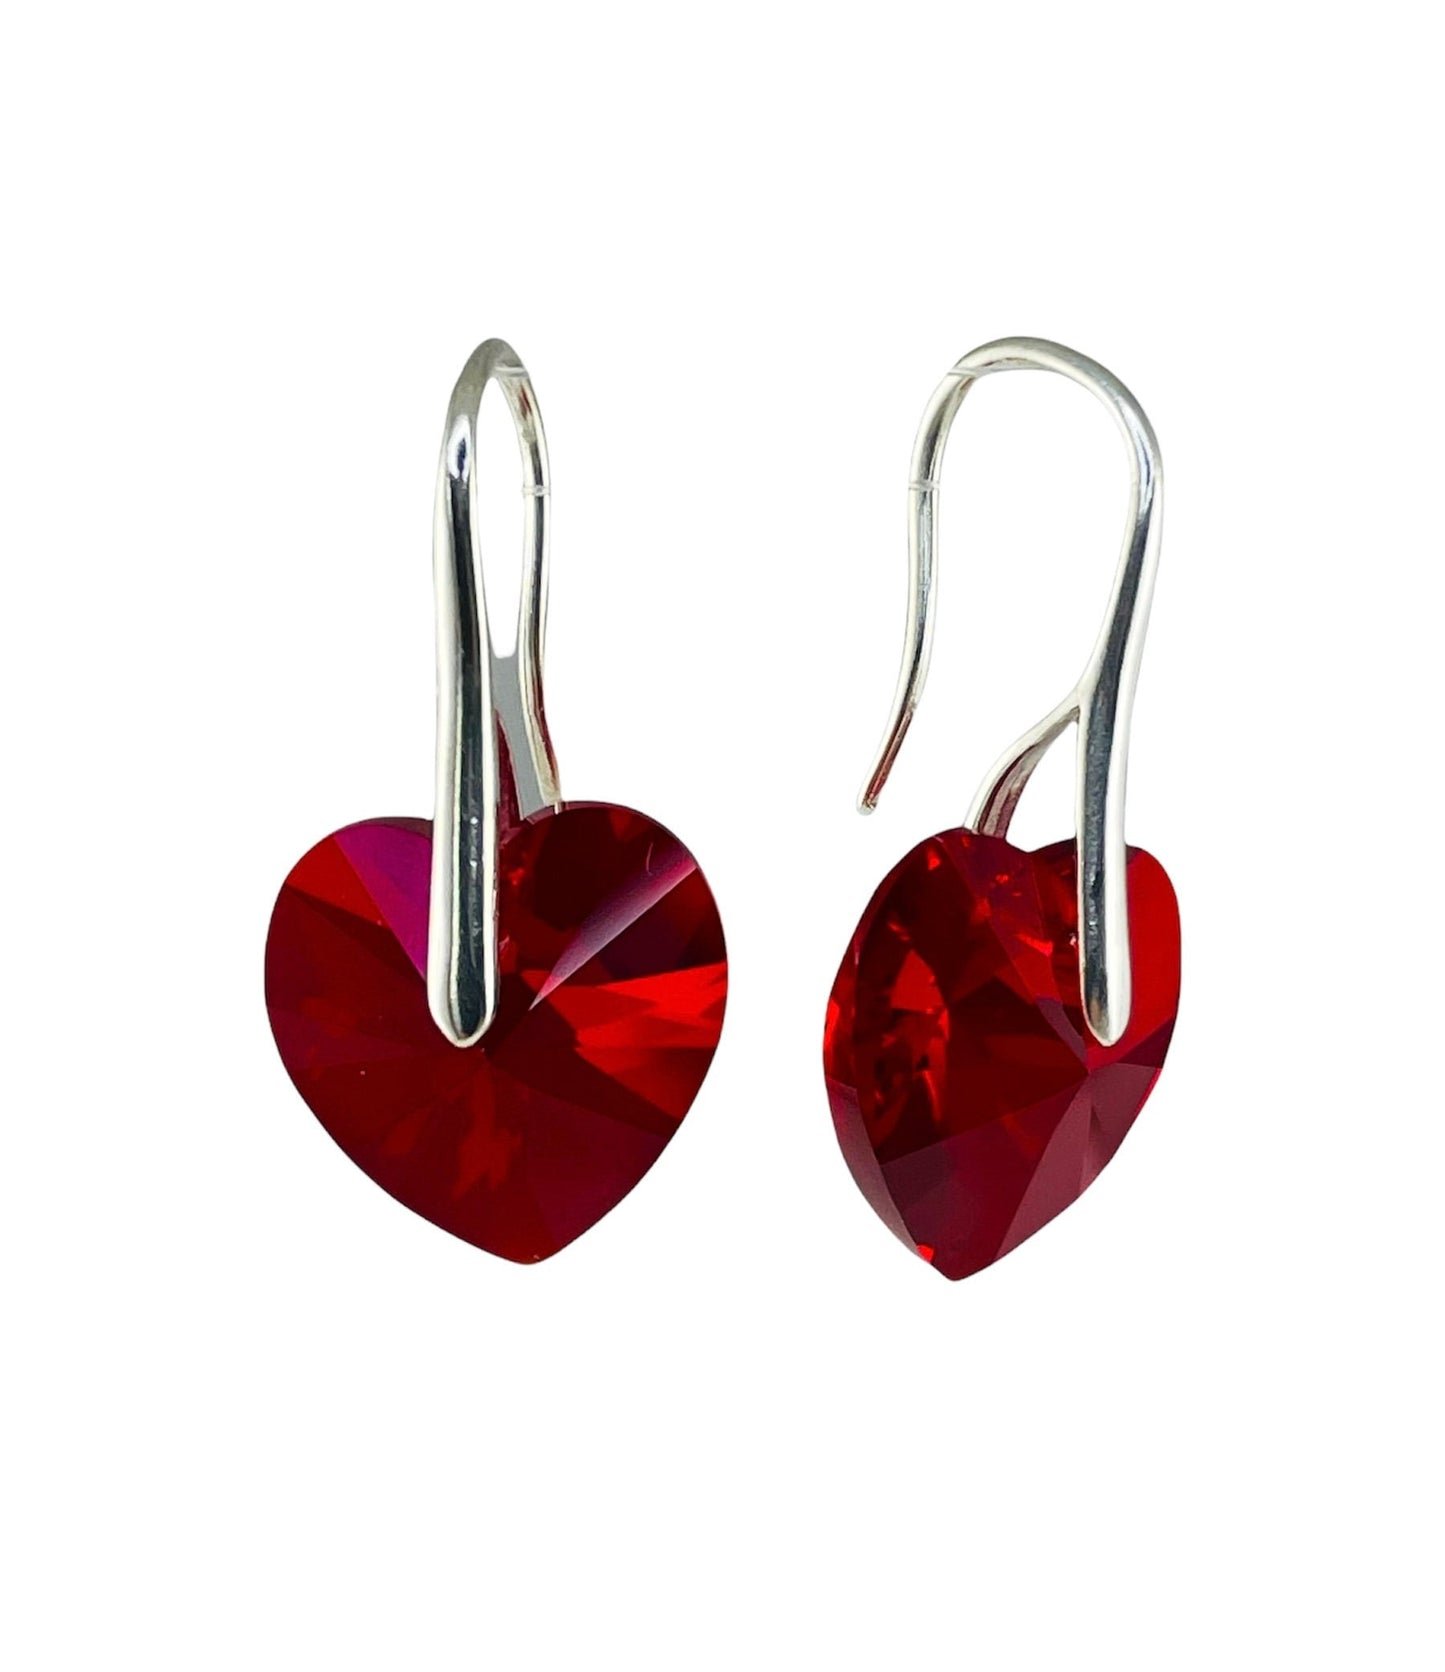 Silver Crystal Red Heart Earrings,Valentine's Day Gift,Heart Earrings,Red Heart Earrings,Siam Red Heart,15th Anniversary Gift For Wife